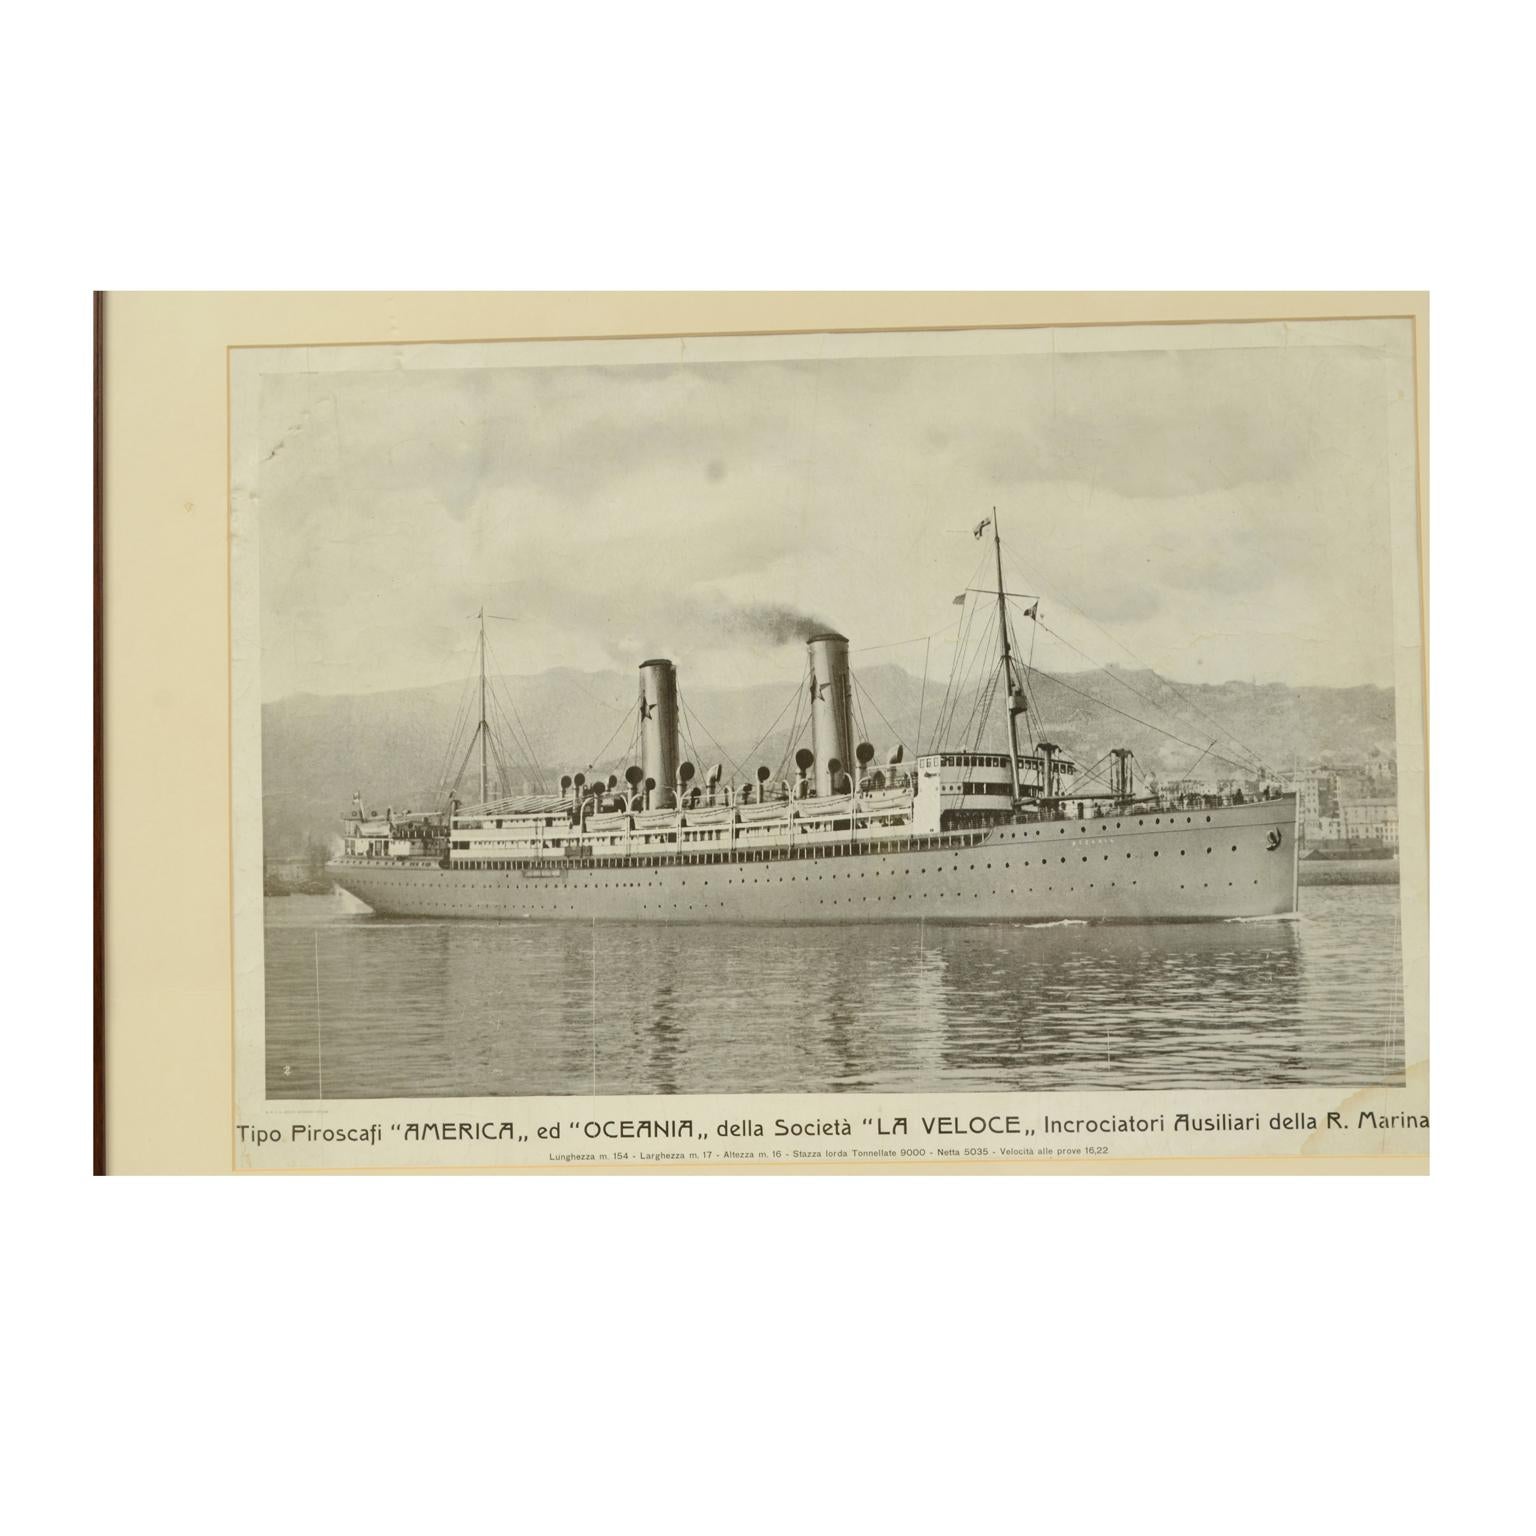 Lithograph on paper published by S.A.I.G, Adolfo Barabino Genova depicting the Oceania steamer. Title of the lithograph “America and Oceania Steamboats of the La Veloce Company, Auxiliary Cruisers of the Royal Navy. Measures: Length m. 154, width,